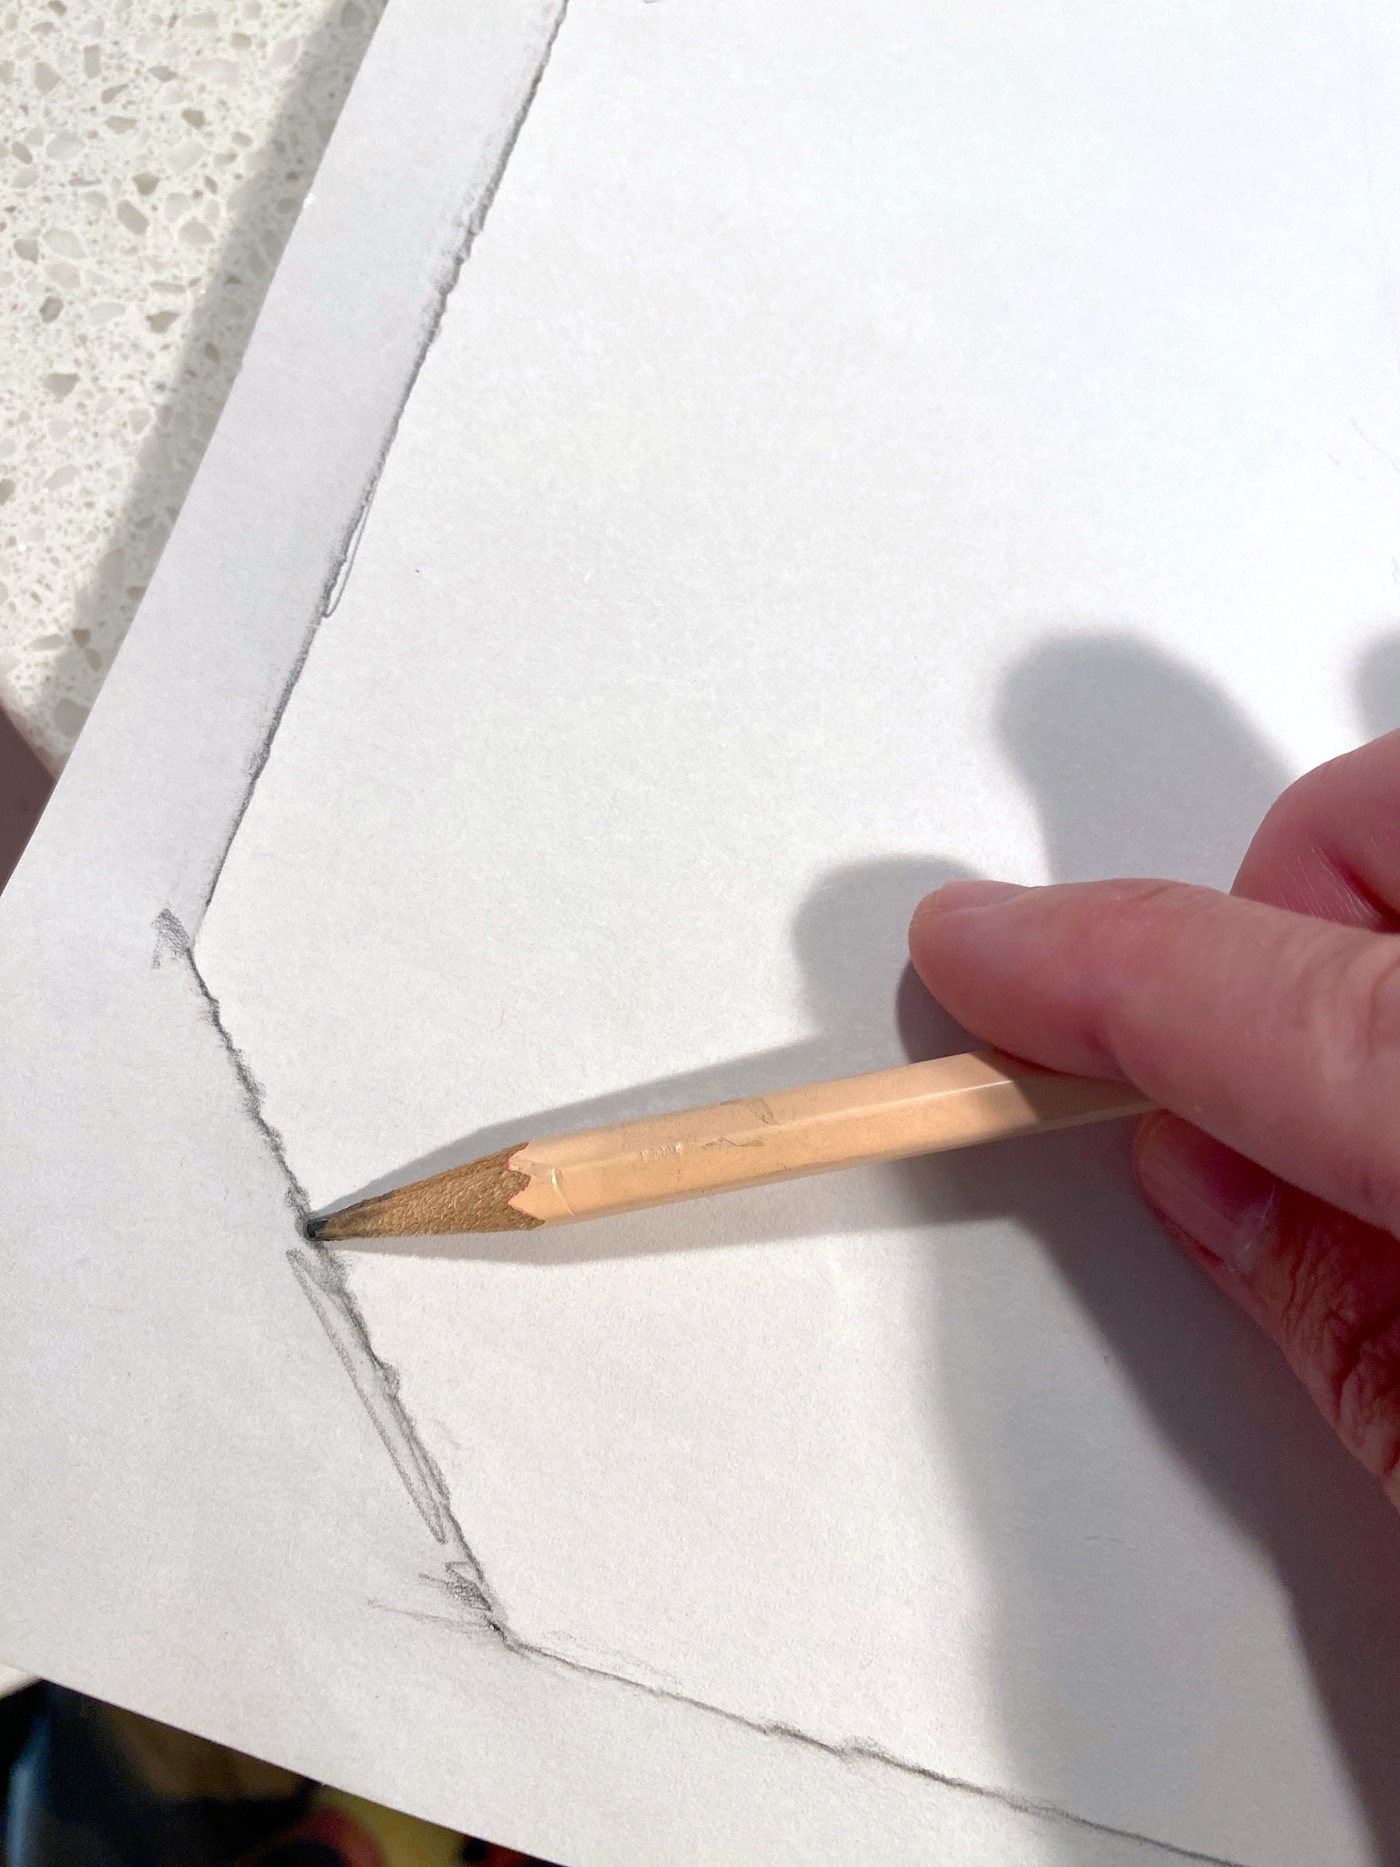 Rubbing a pencil on the edge of the plaque and paper to make a pattern